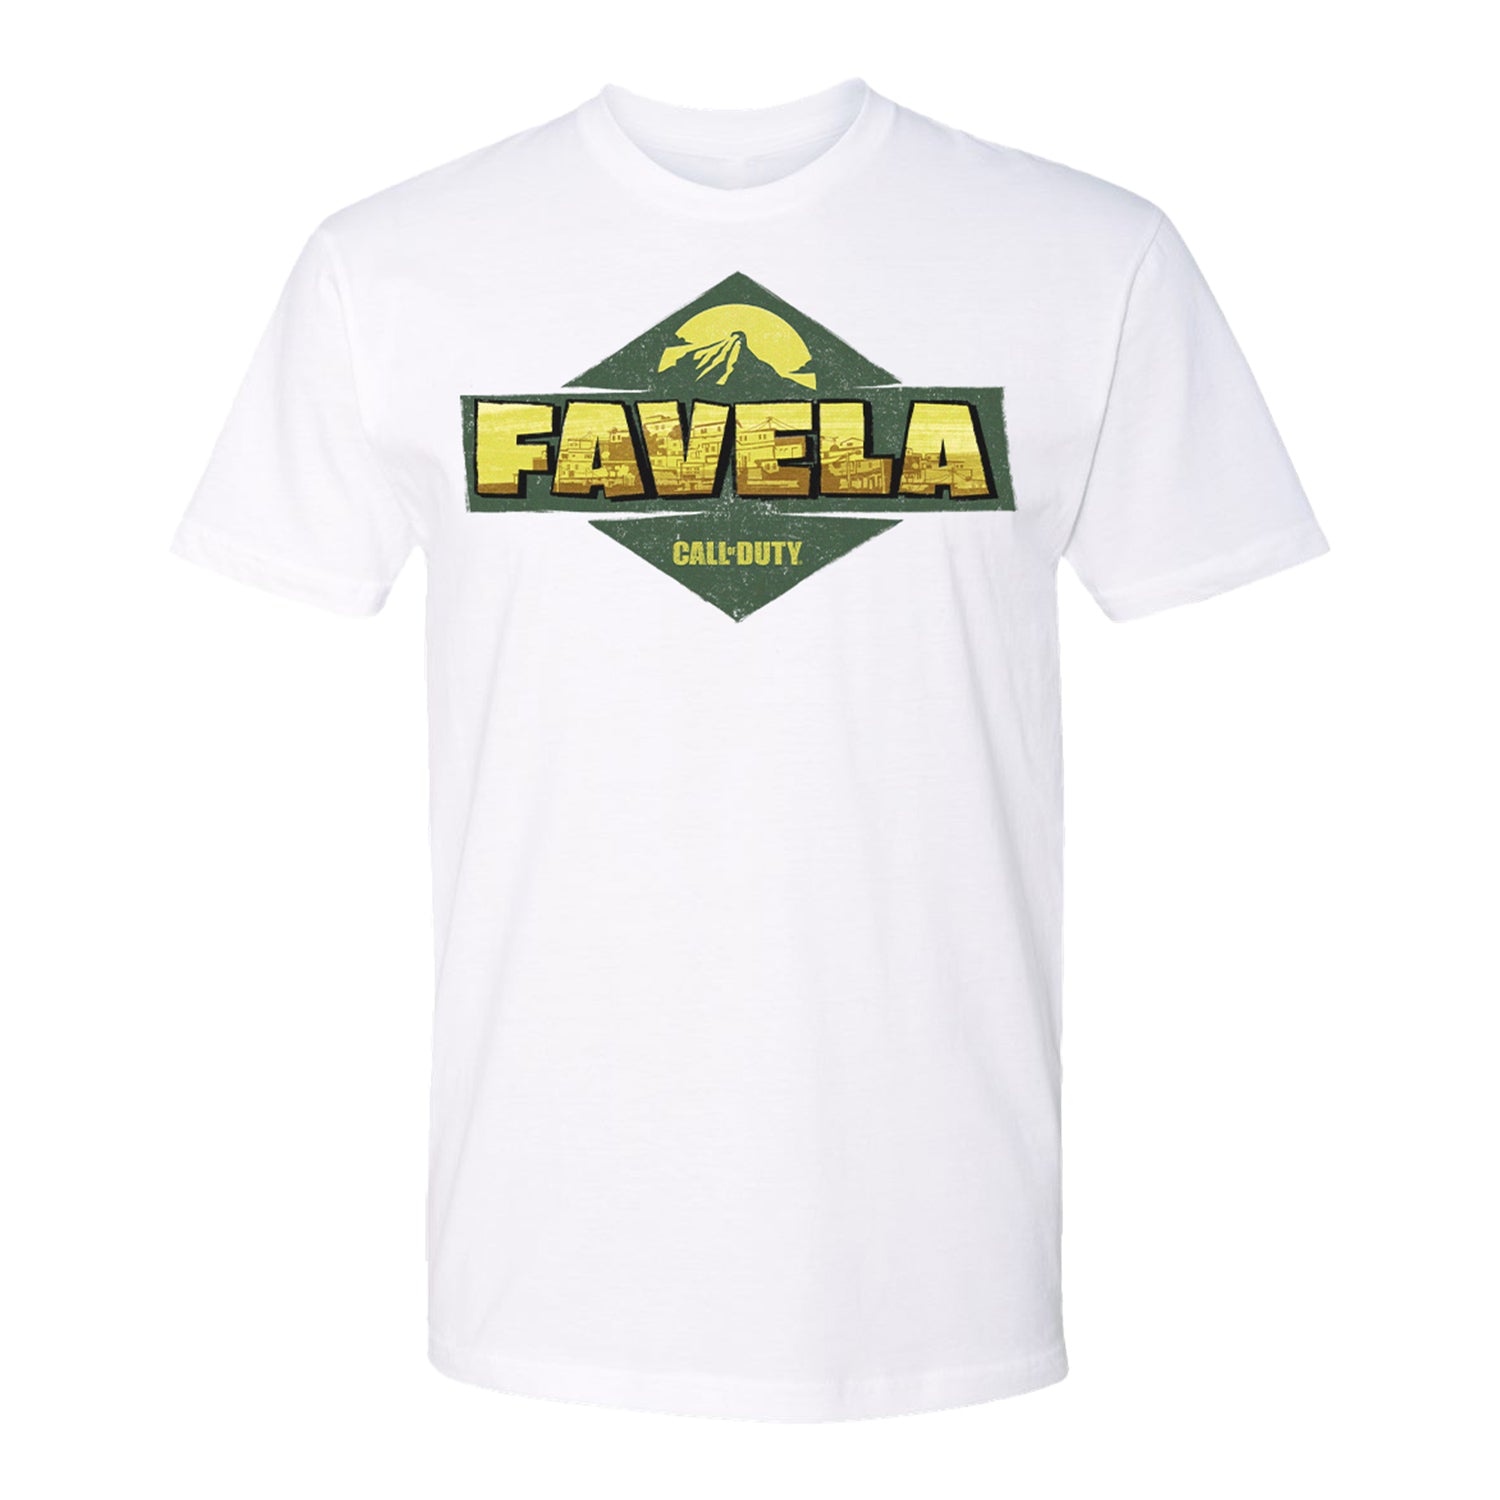 Call of Duty Favela T-Shirt - White Front View